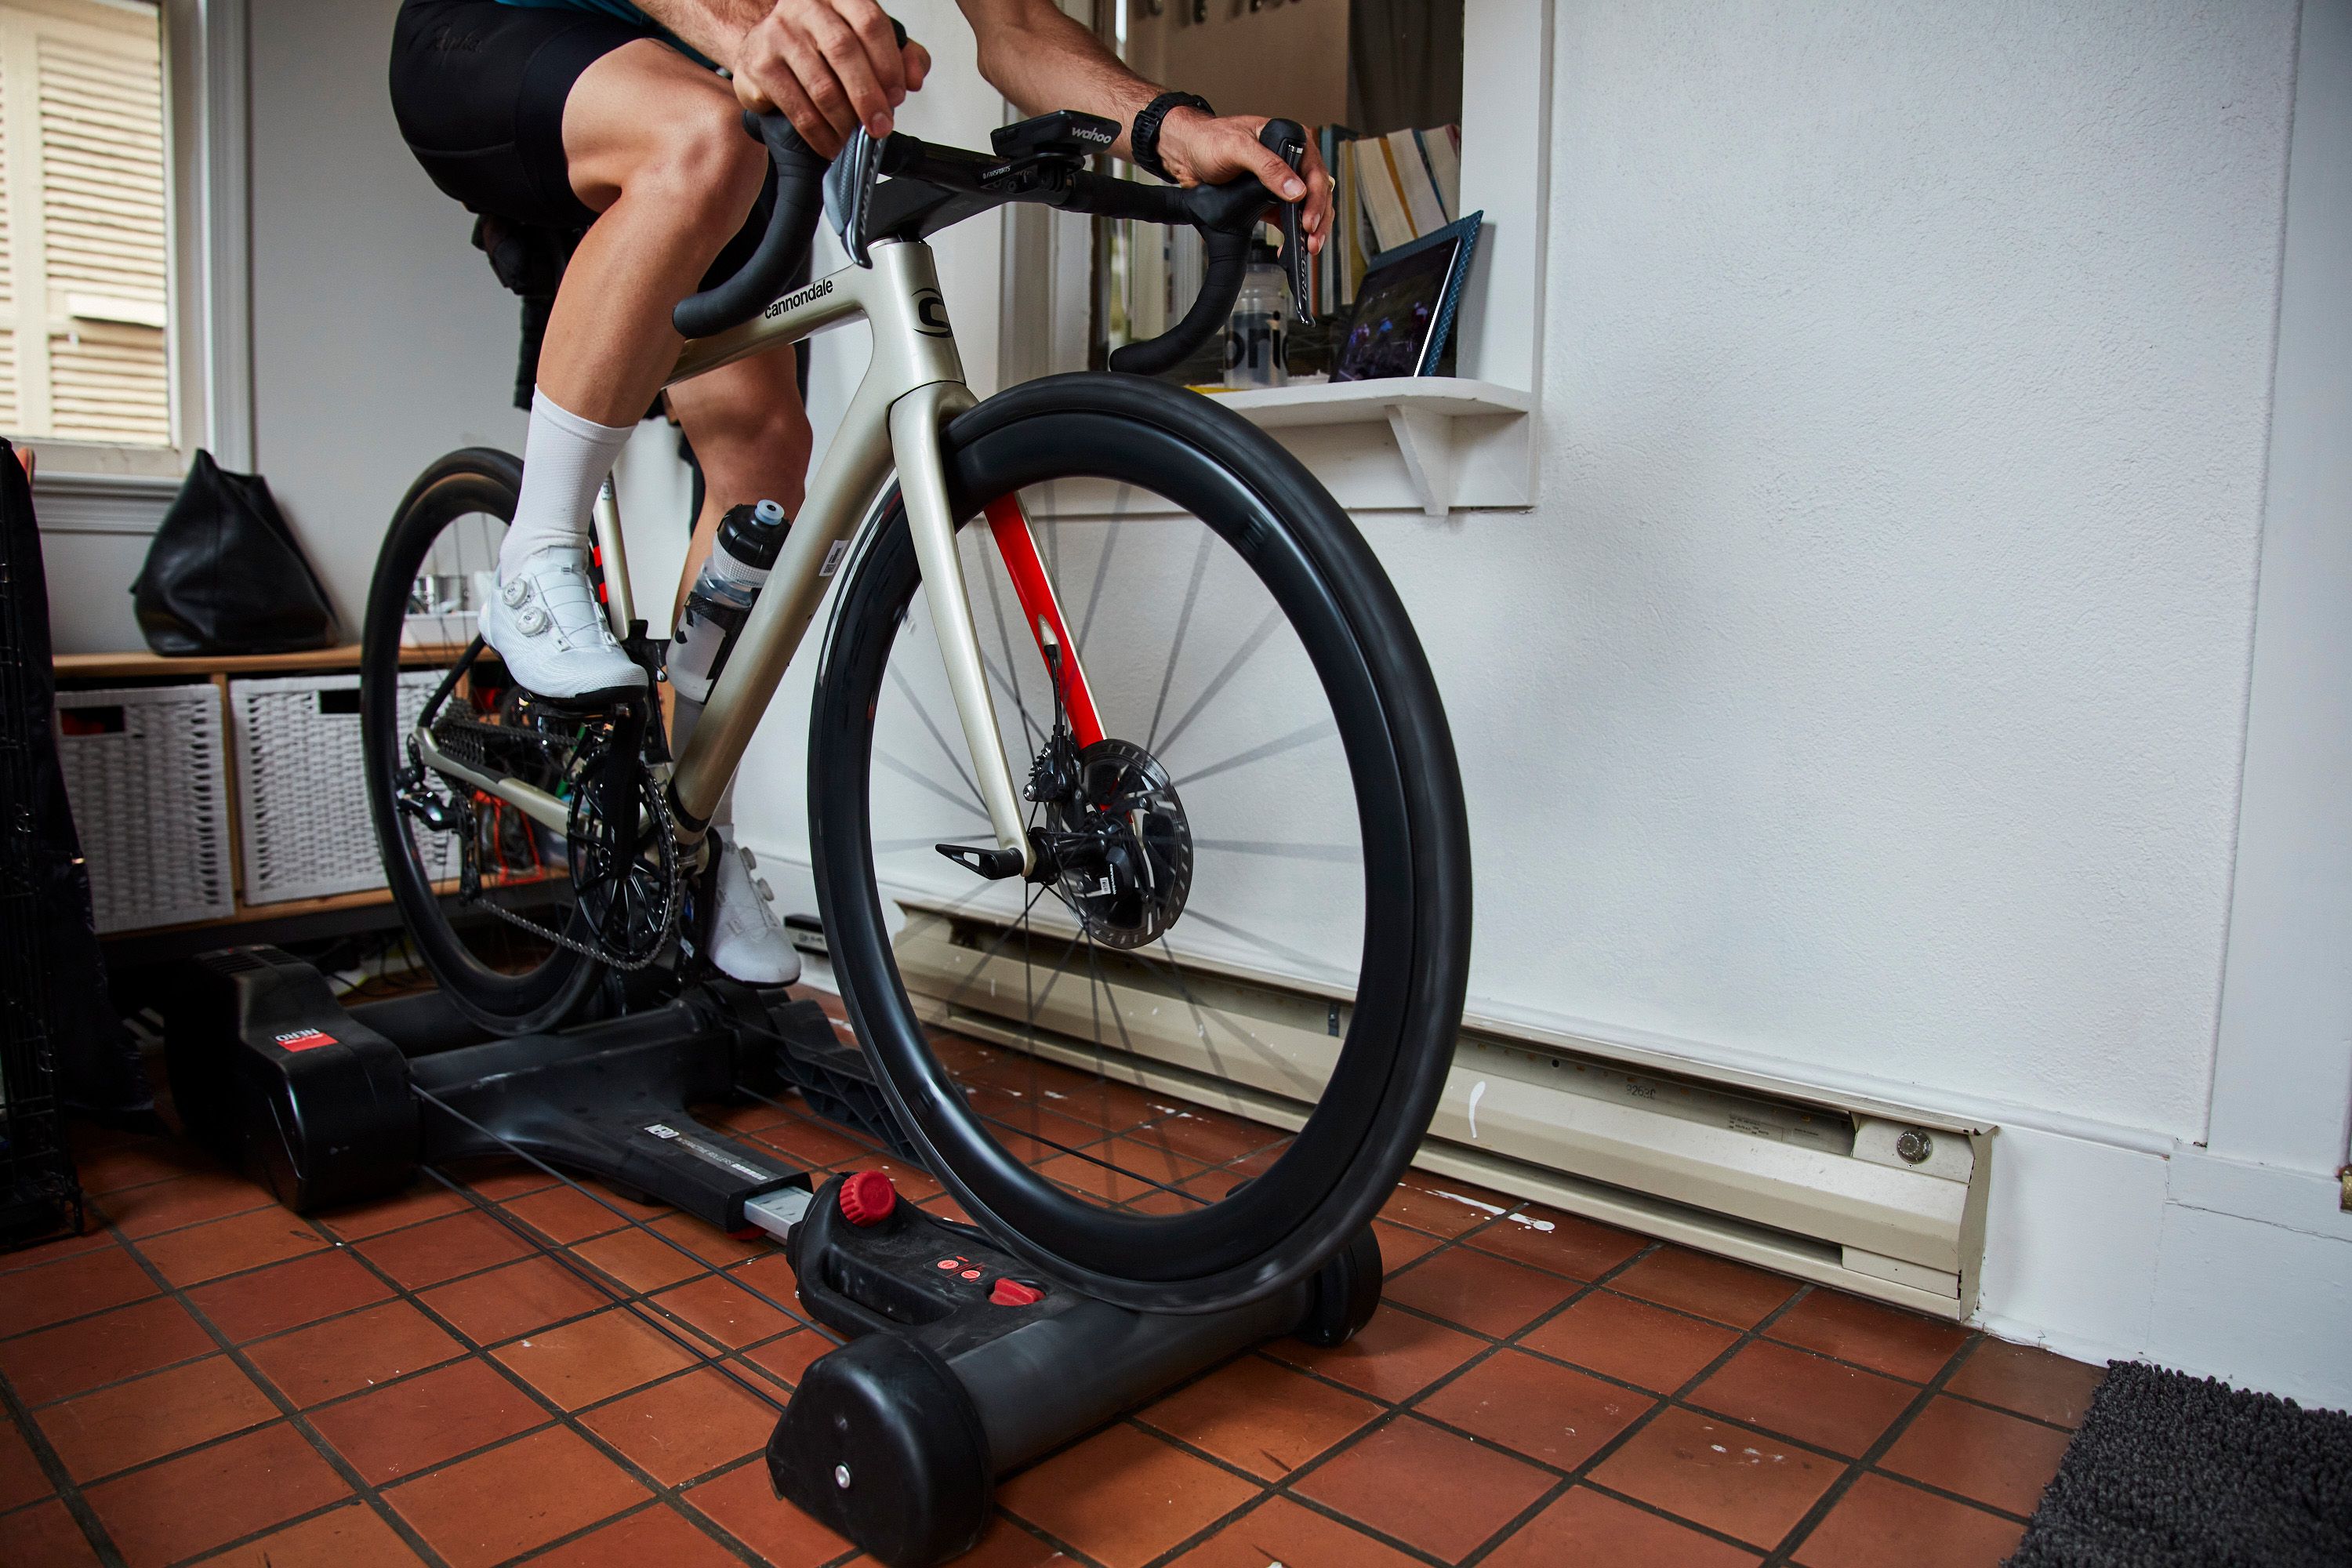 How to Get the Most Out of Zwift, According to Cycling Pros